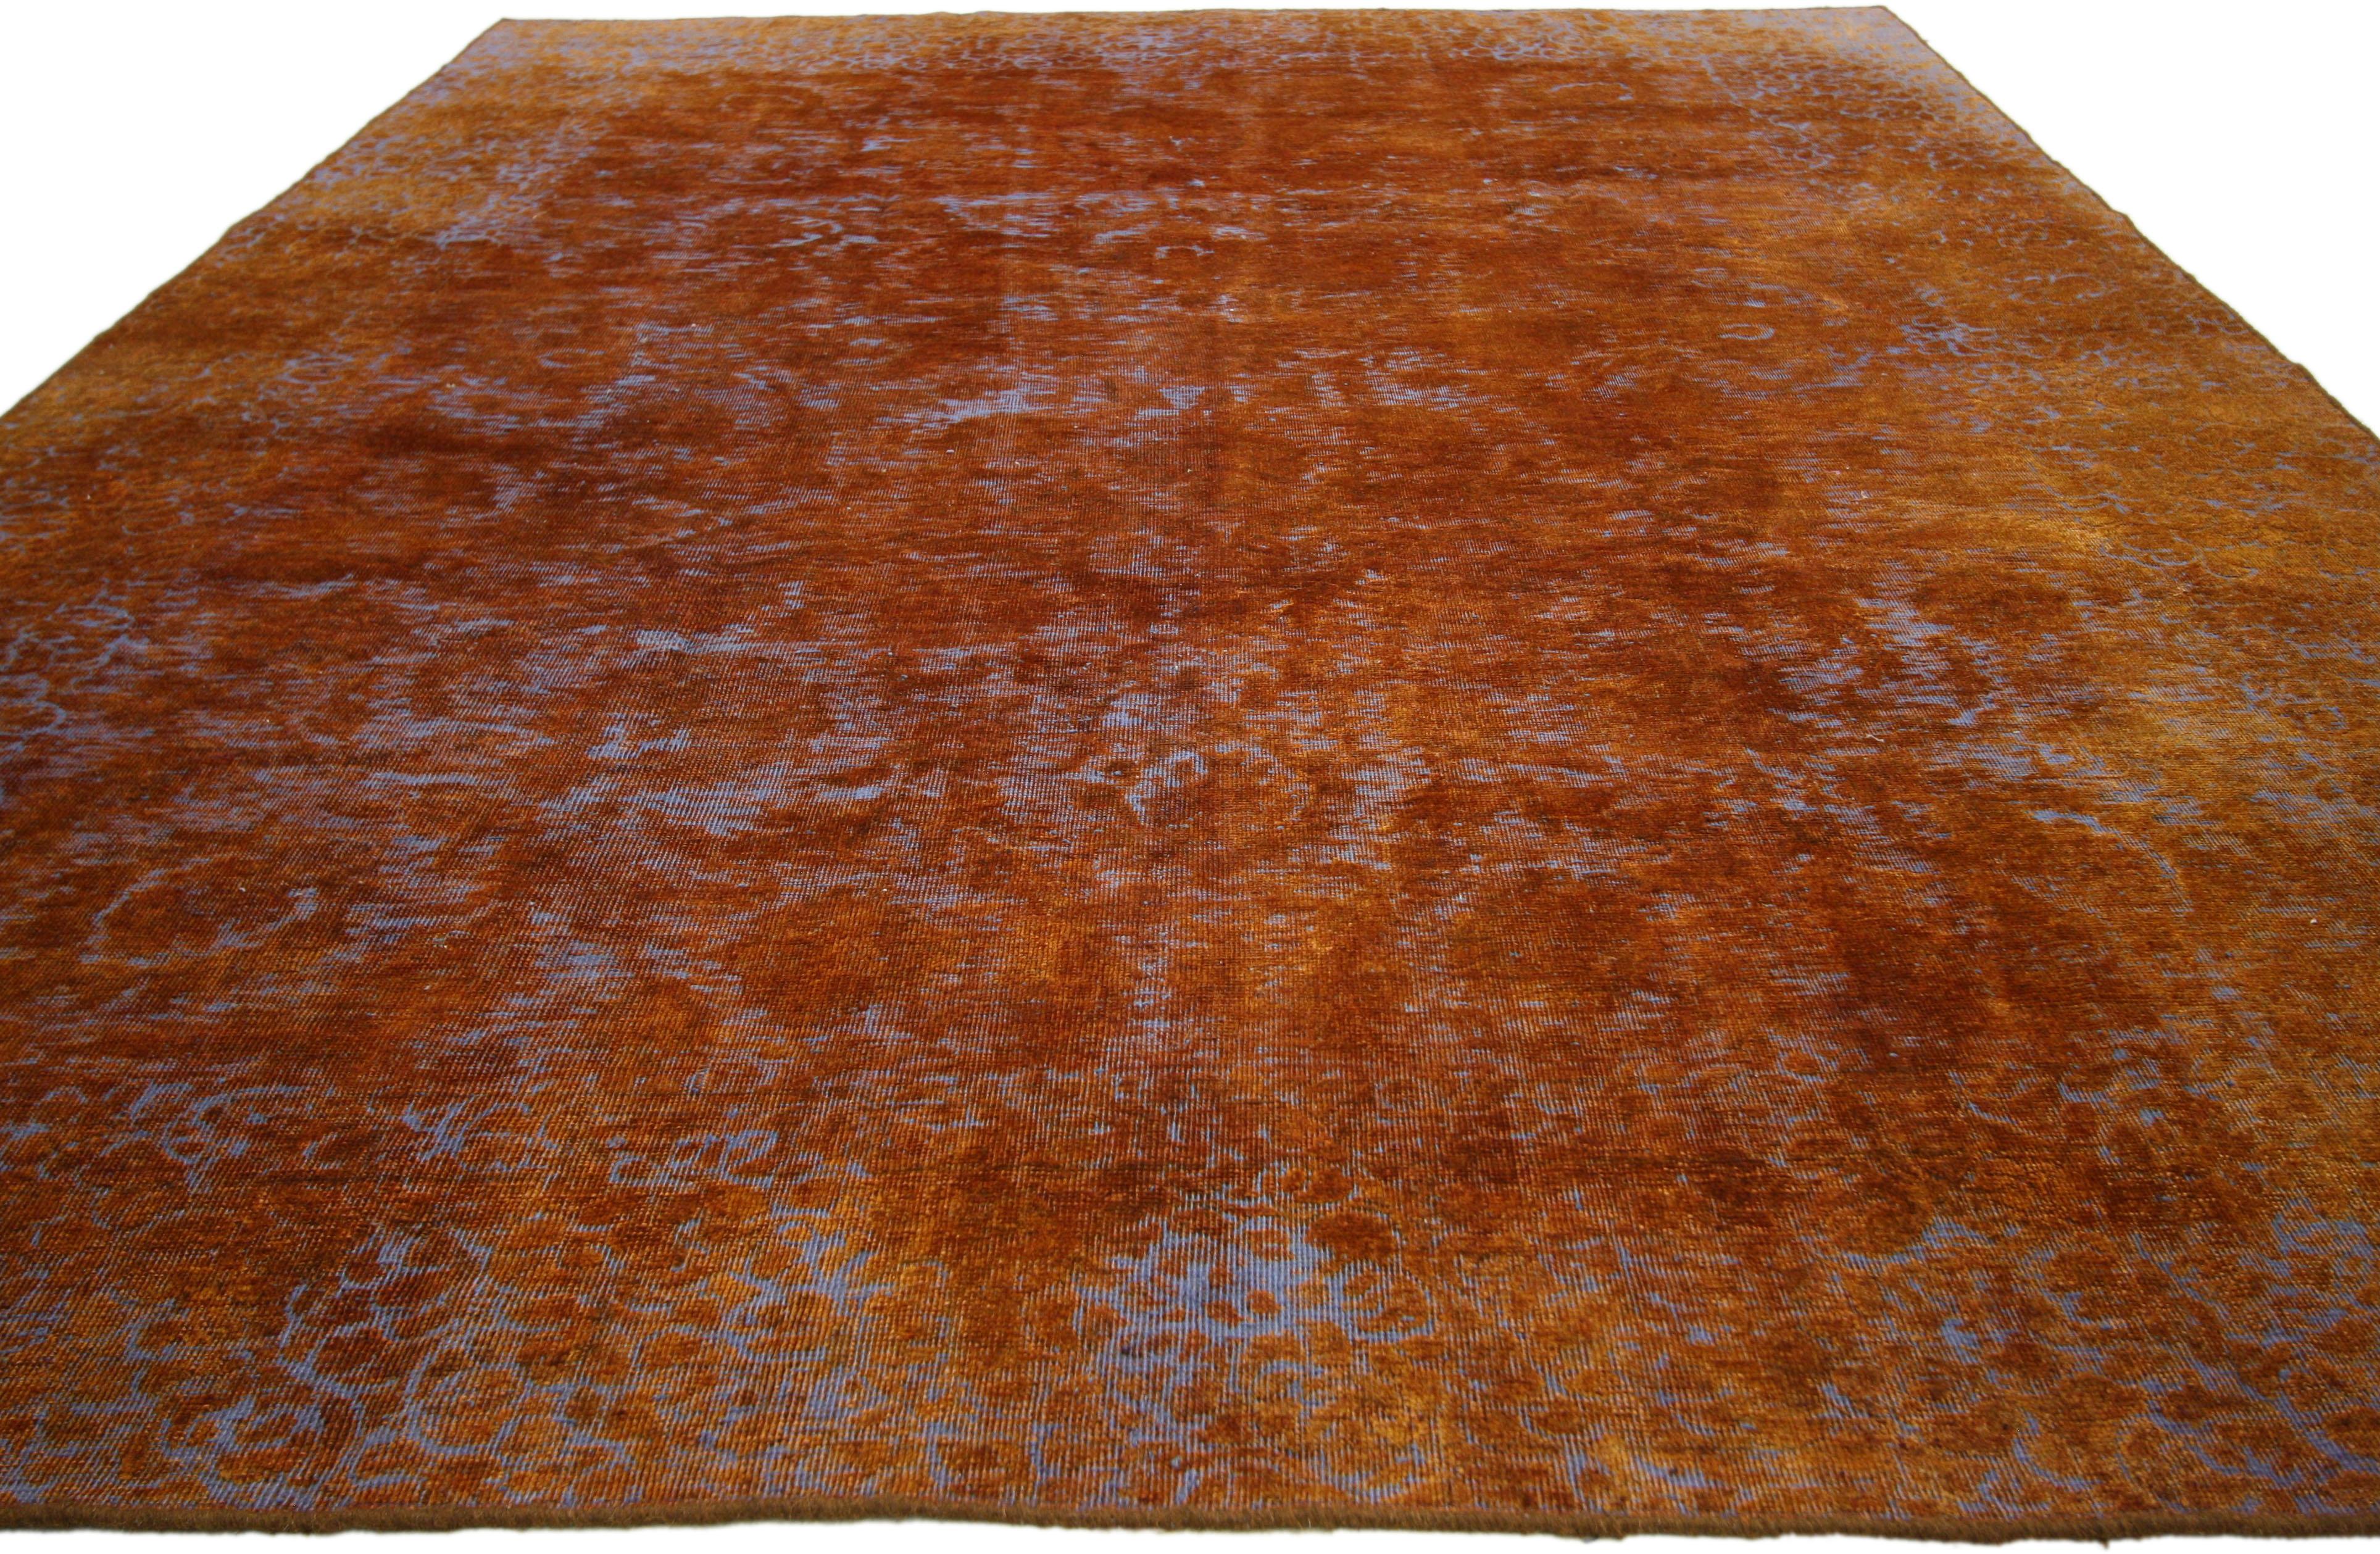 Hand-Knotted Distressed Vintage Turkish Rug with Mid-Century Modern Northwestern Style